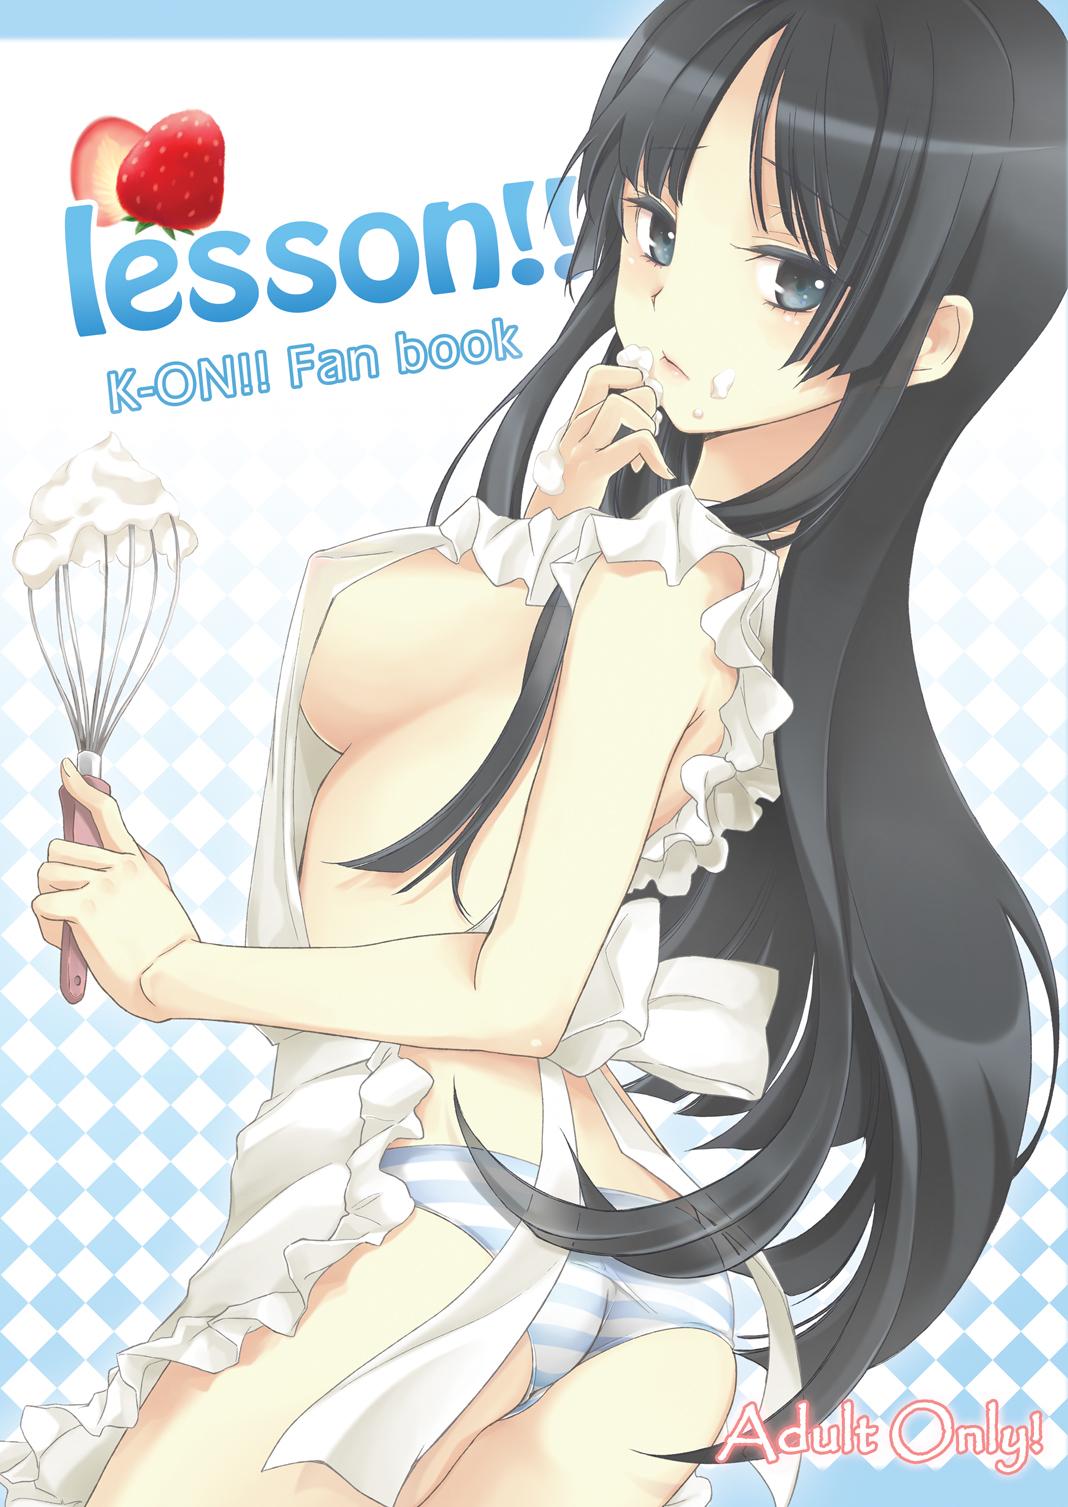 Food lesson!! - K-on Hardcore Sex - Picture 1